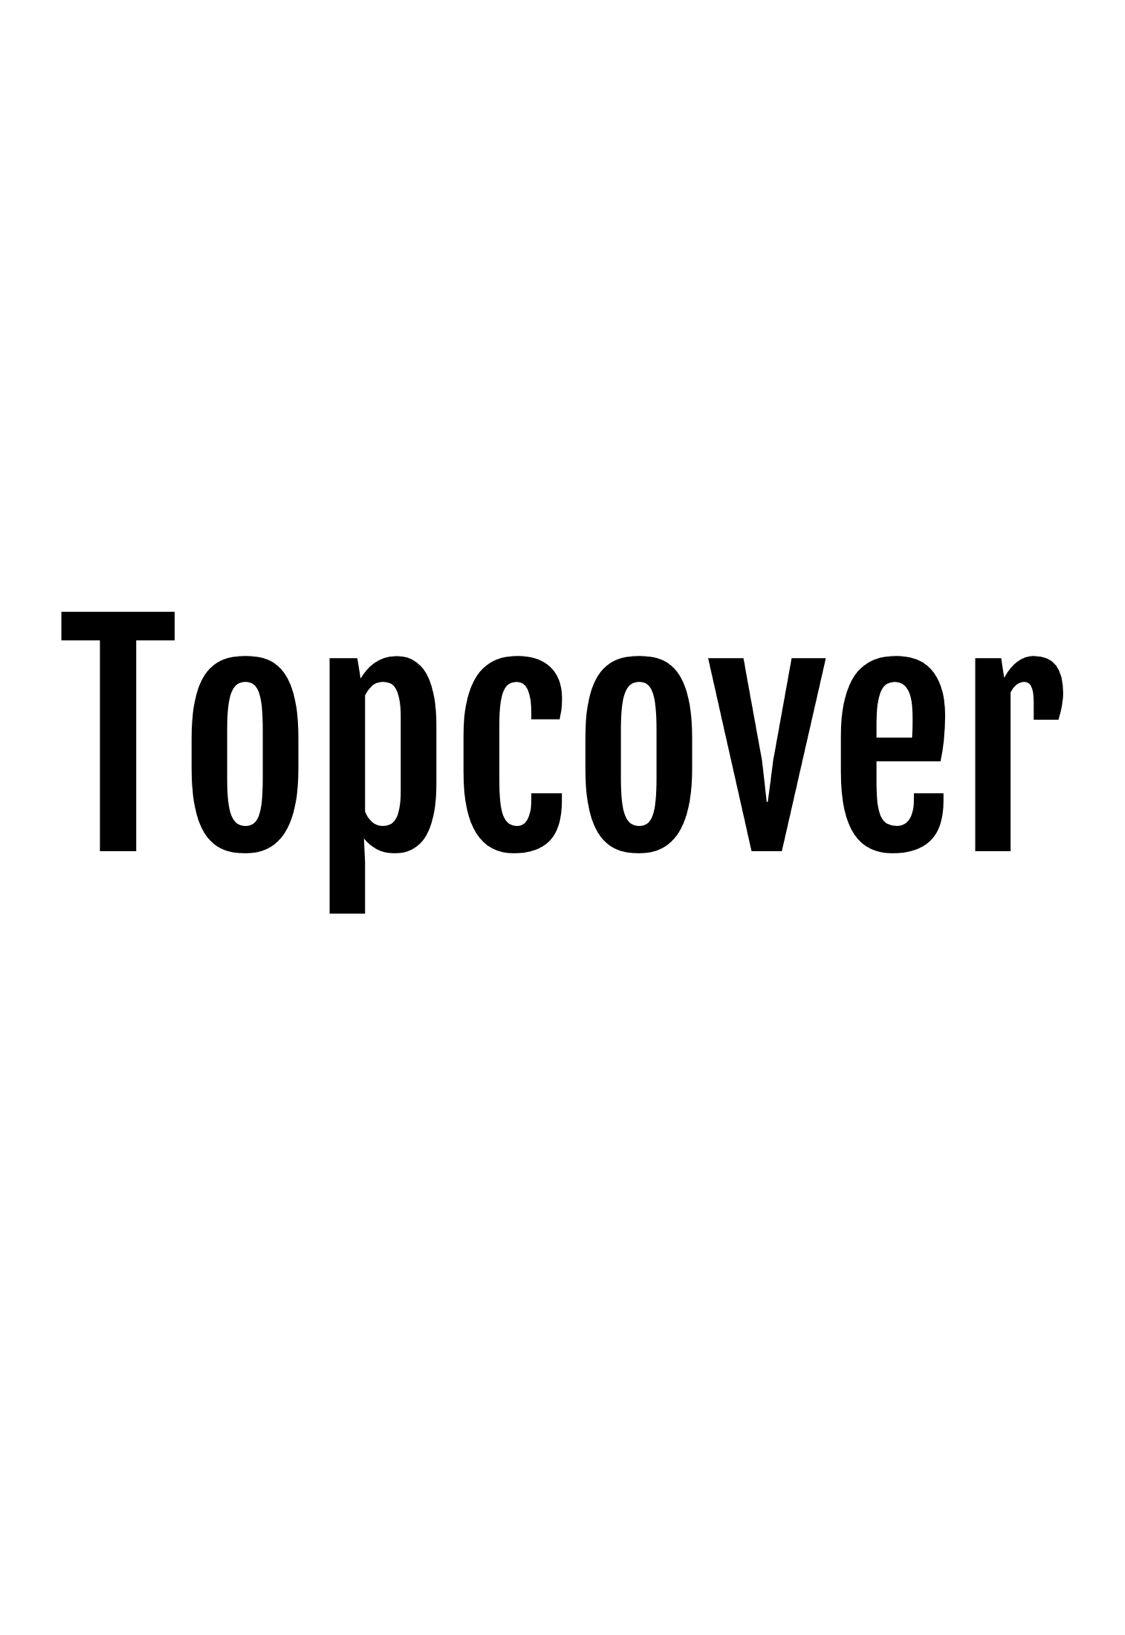 TOPCOVER